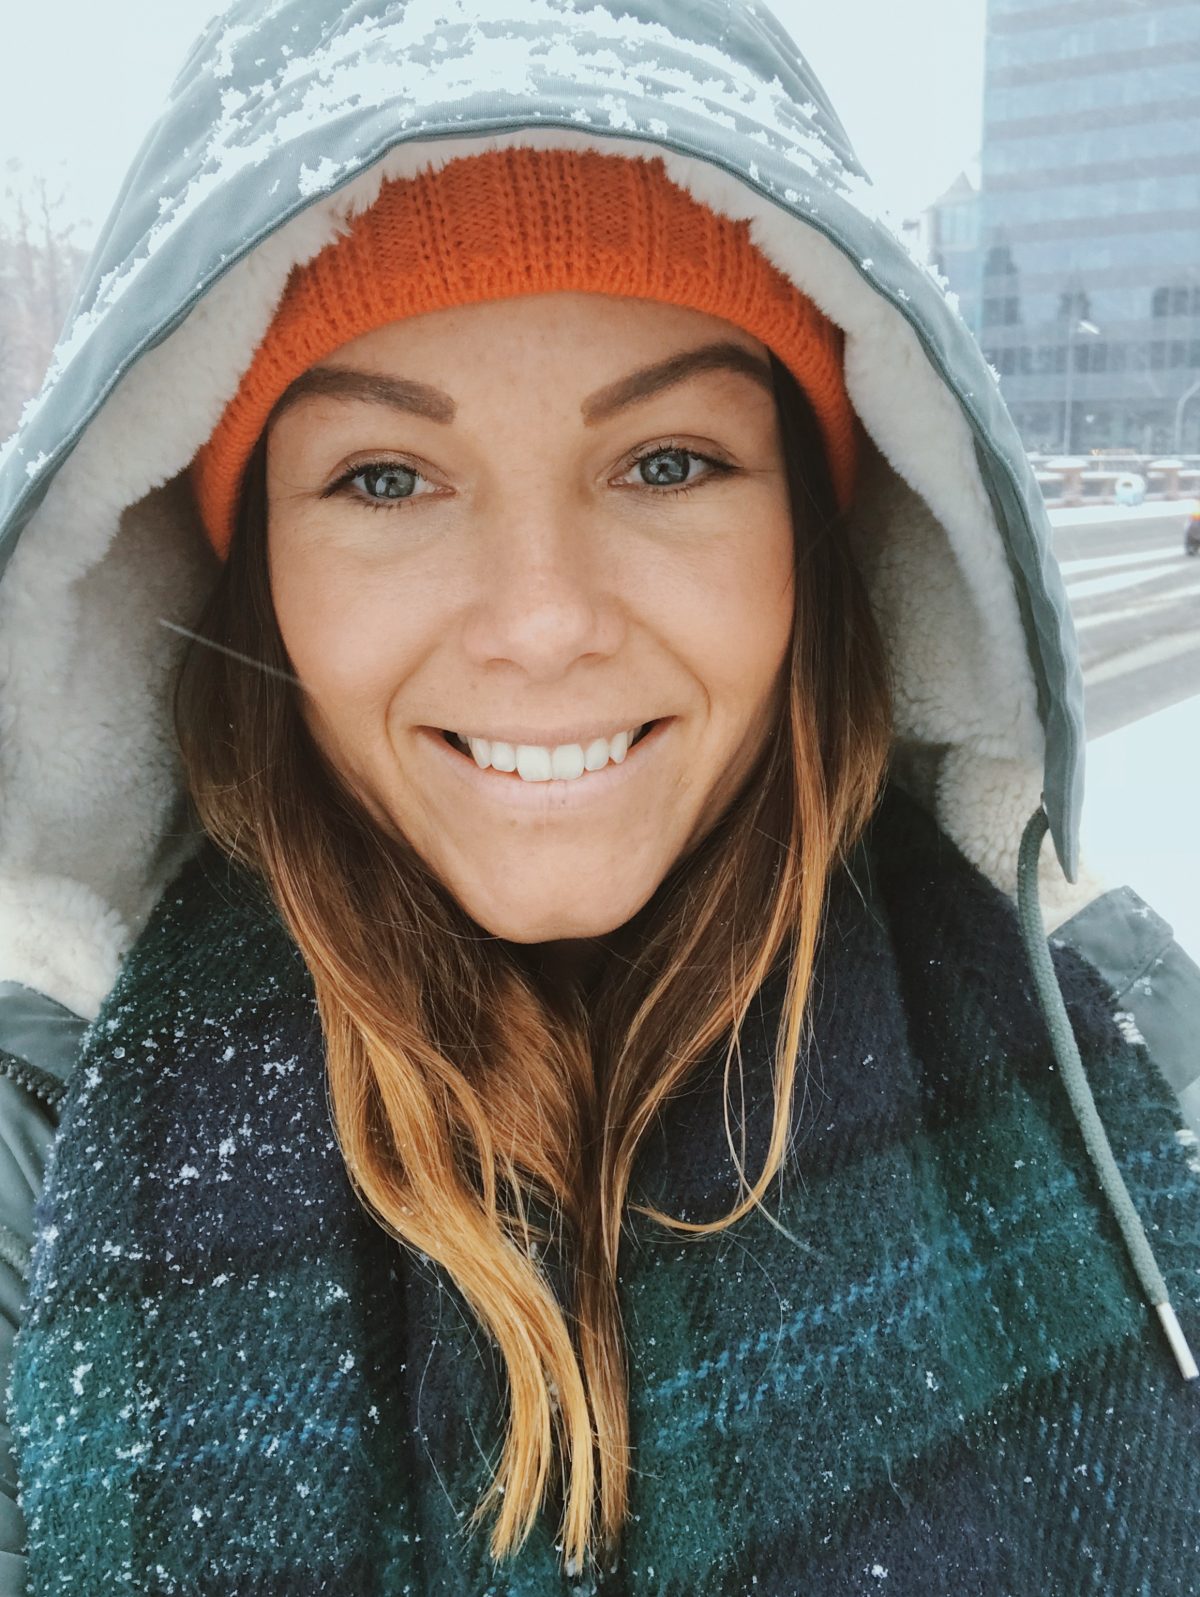 A girl smiling in the snow, wearing outdoor gear